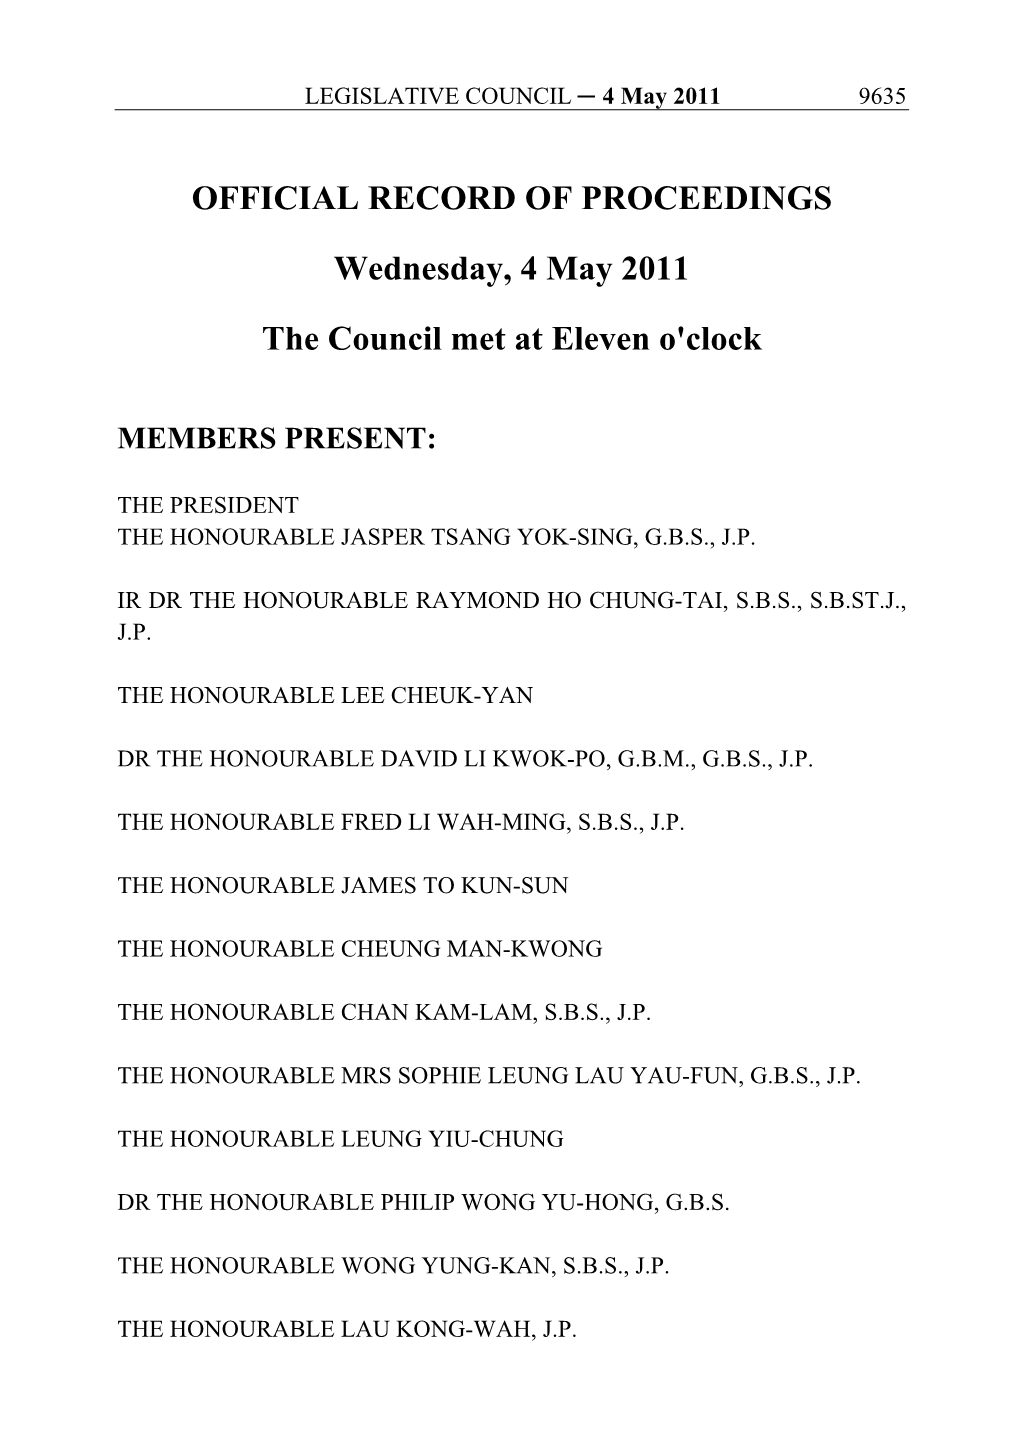 OFFICIAL RECORD of PROCEEDINGS Wednesday, 4 May 2011 the Council Met at Eleven O'clock